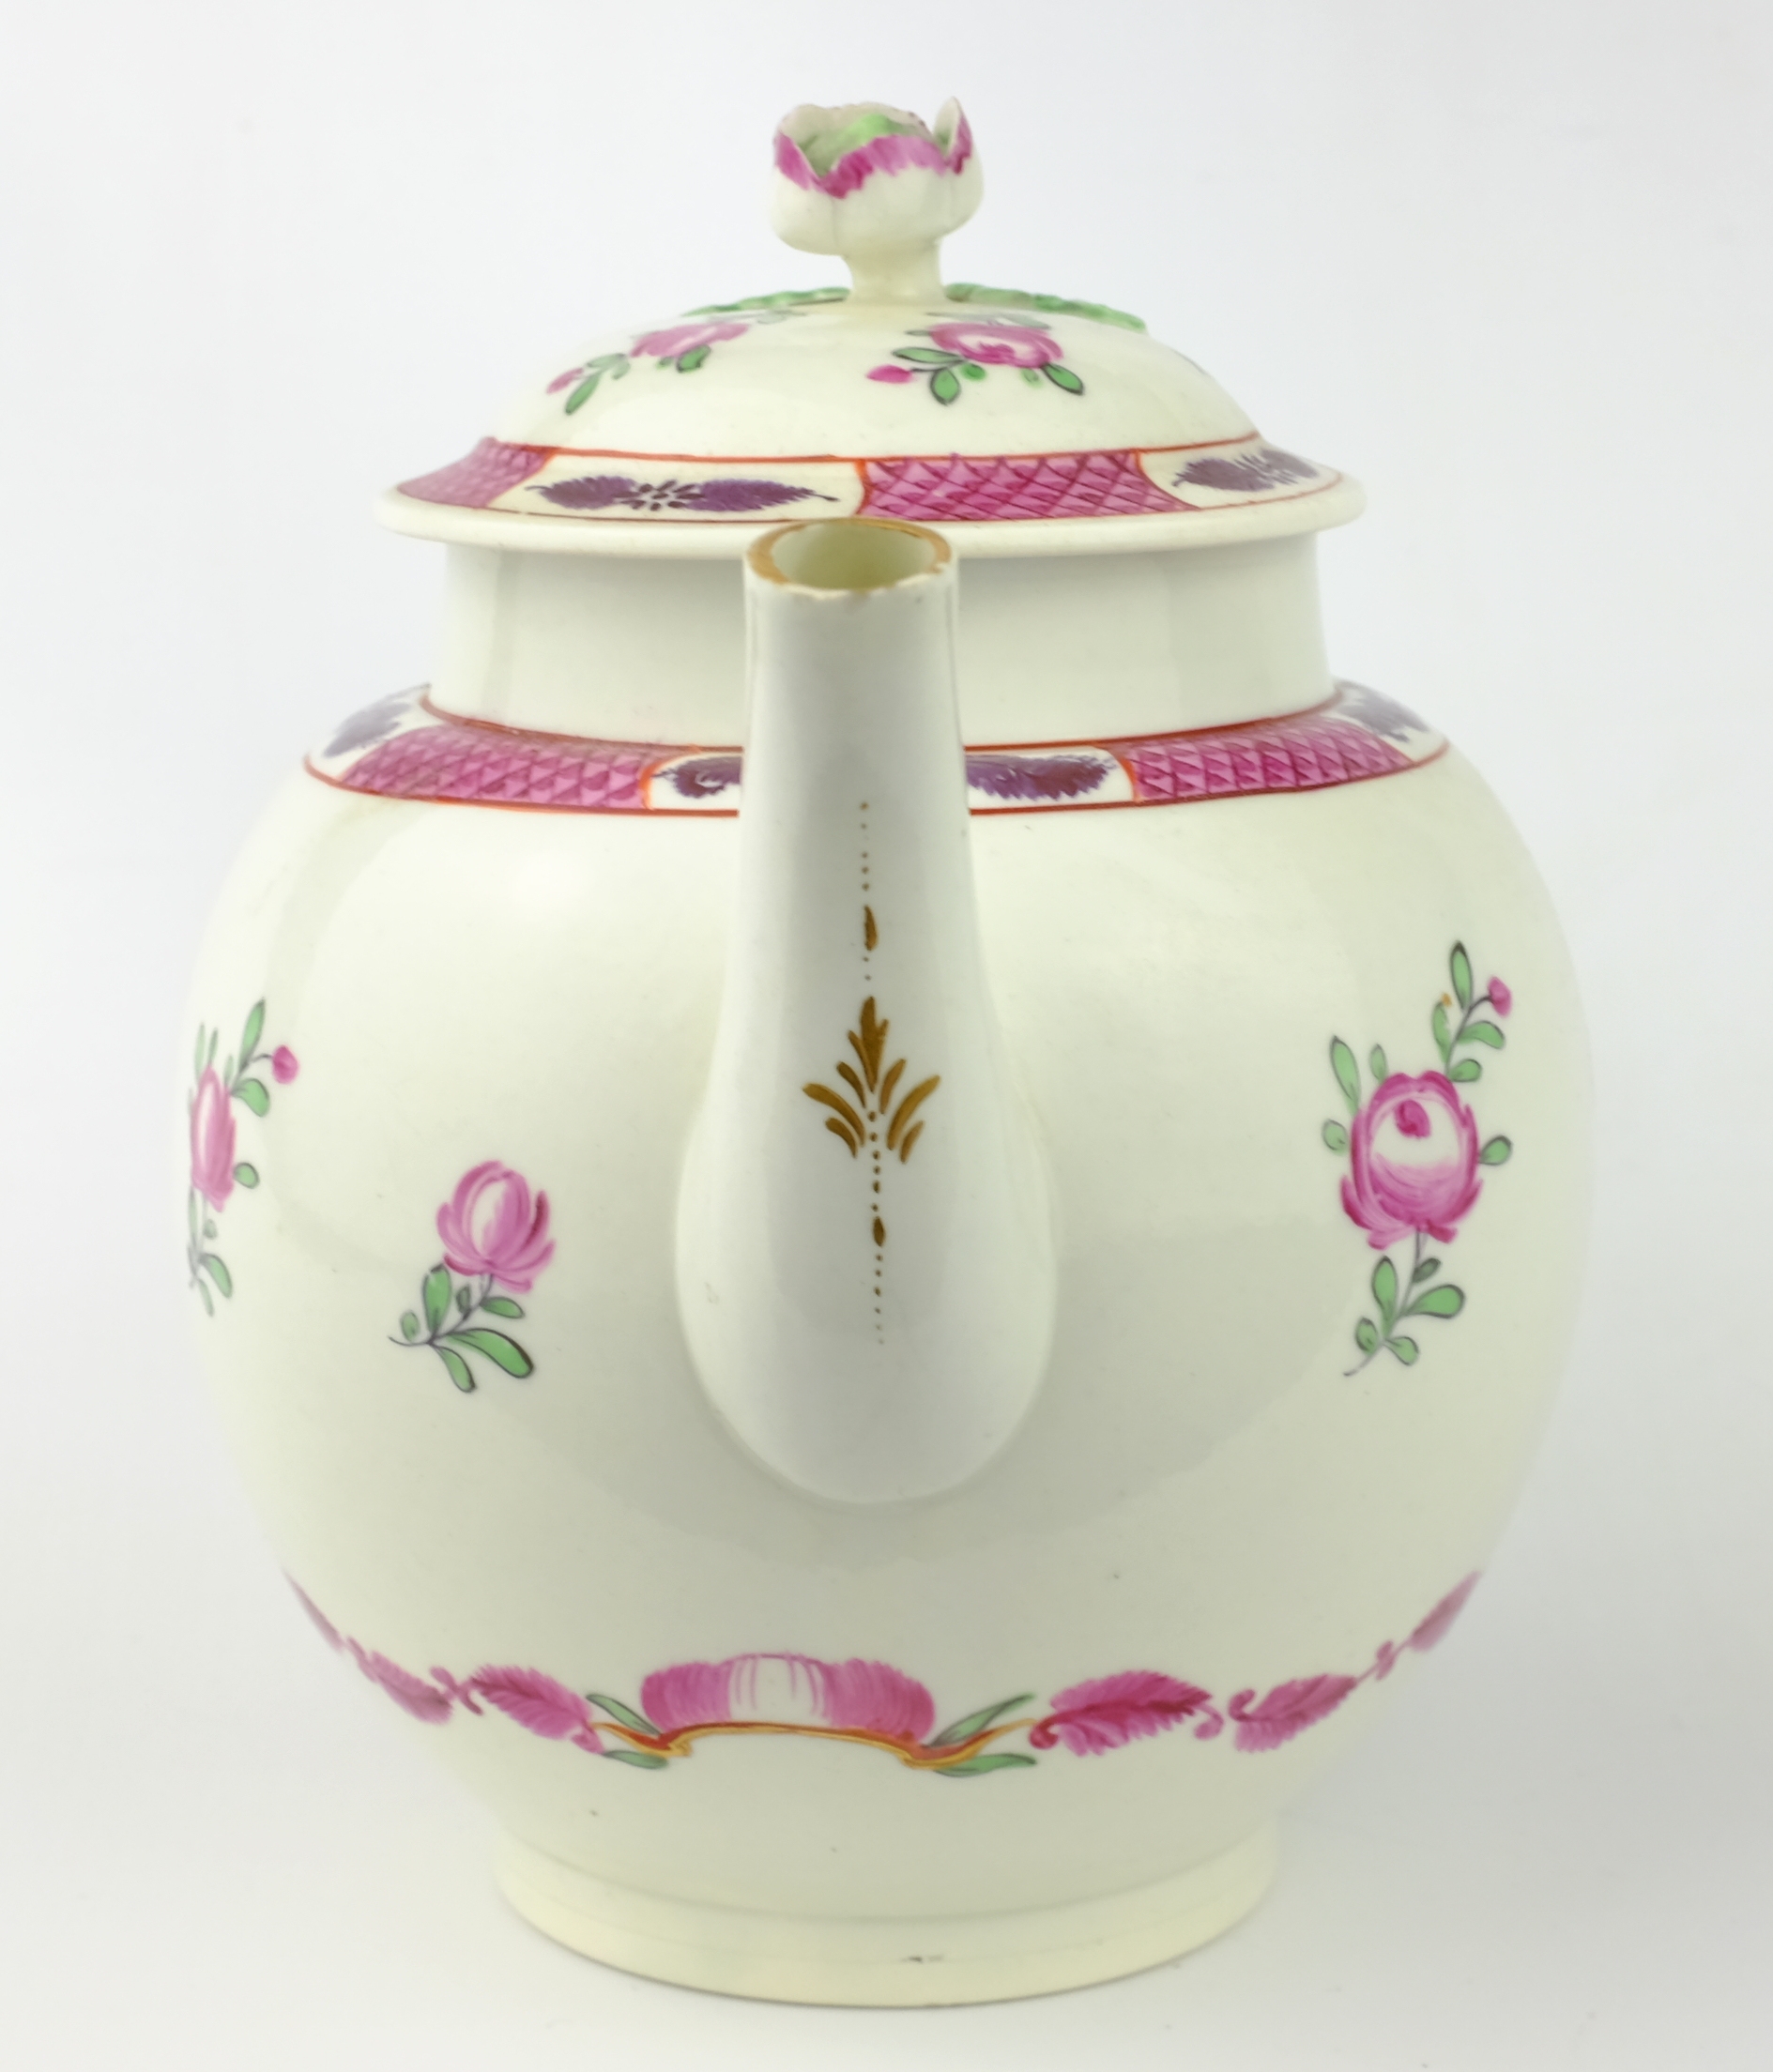 Late 18th century globular teapot, painted with floral sprays below a fish scale border, - Image 3 of 8